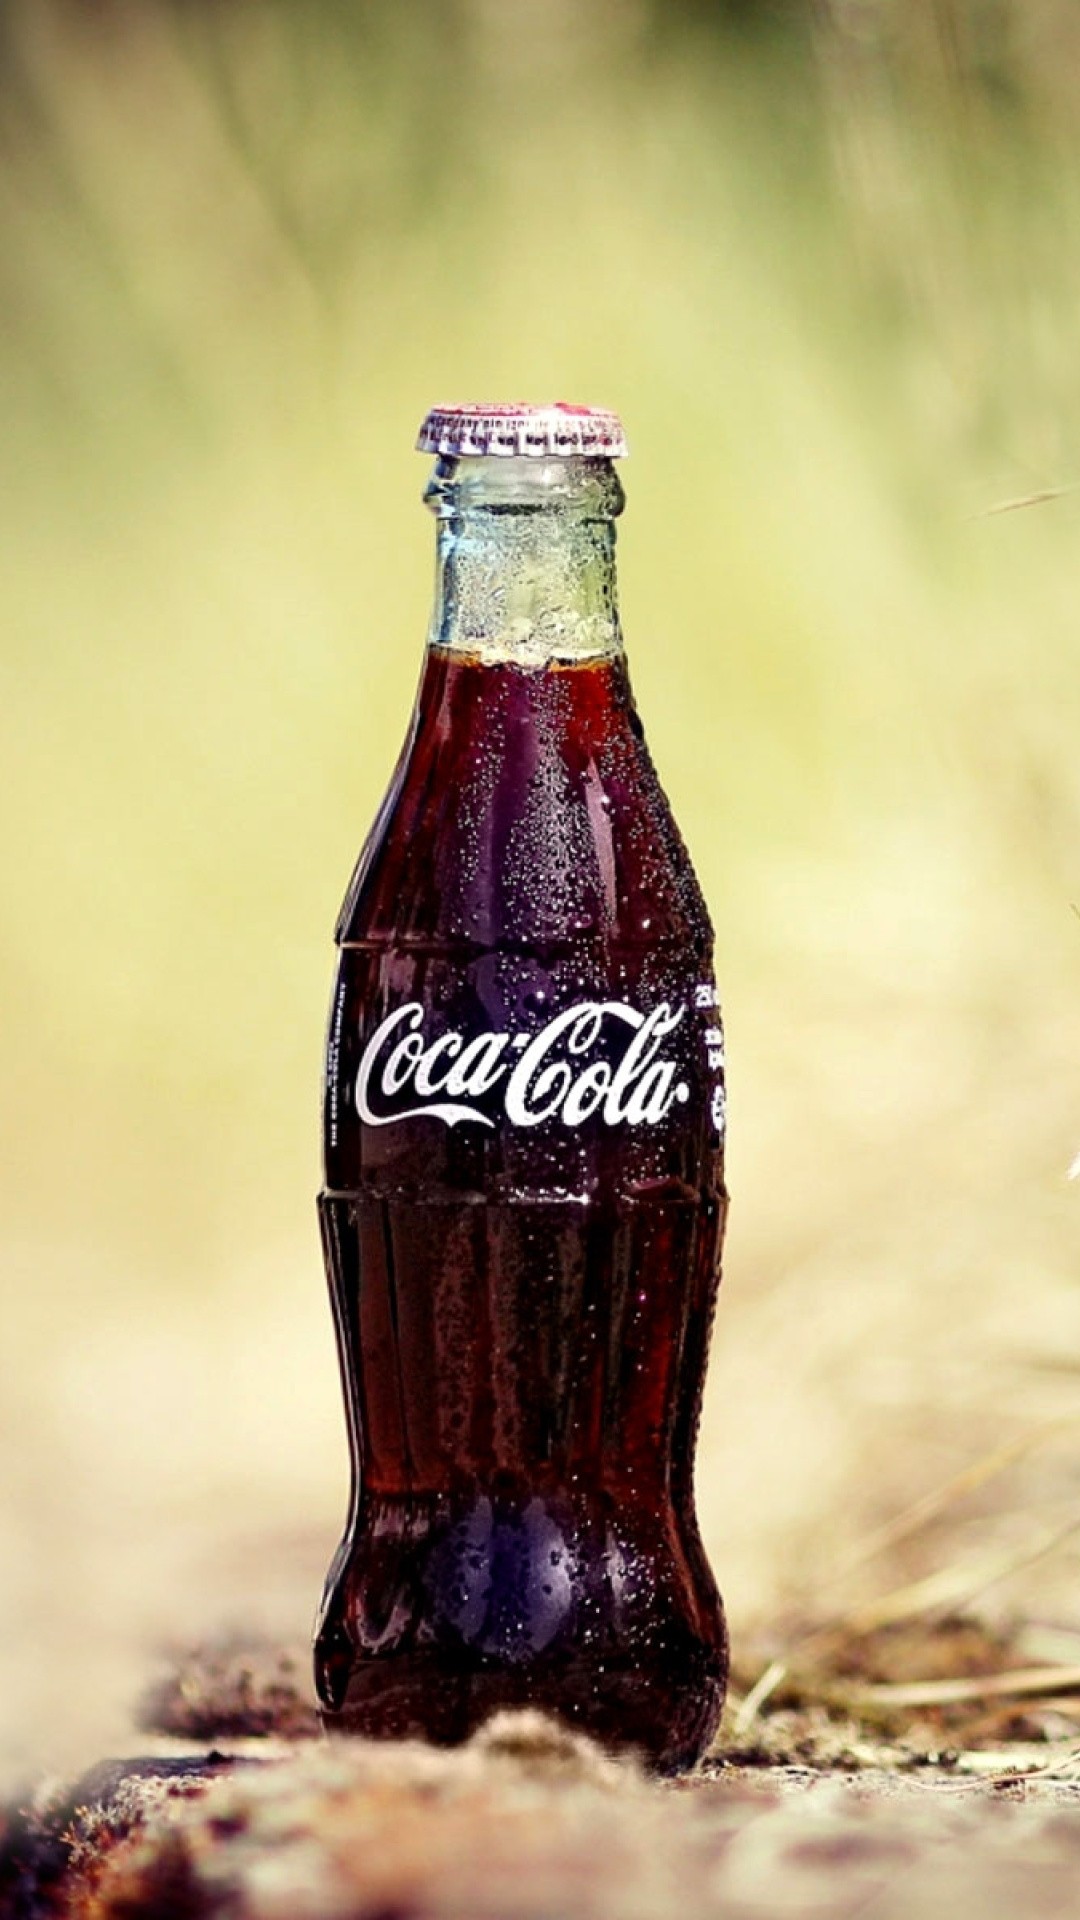 Coca Cola iPhone Wallpapers: 16 images - WallpaperBoat